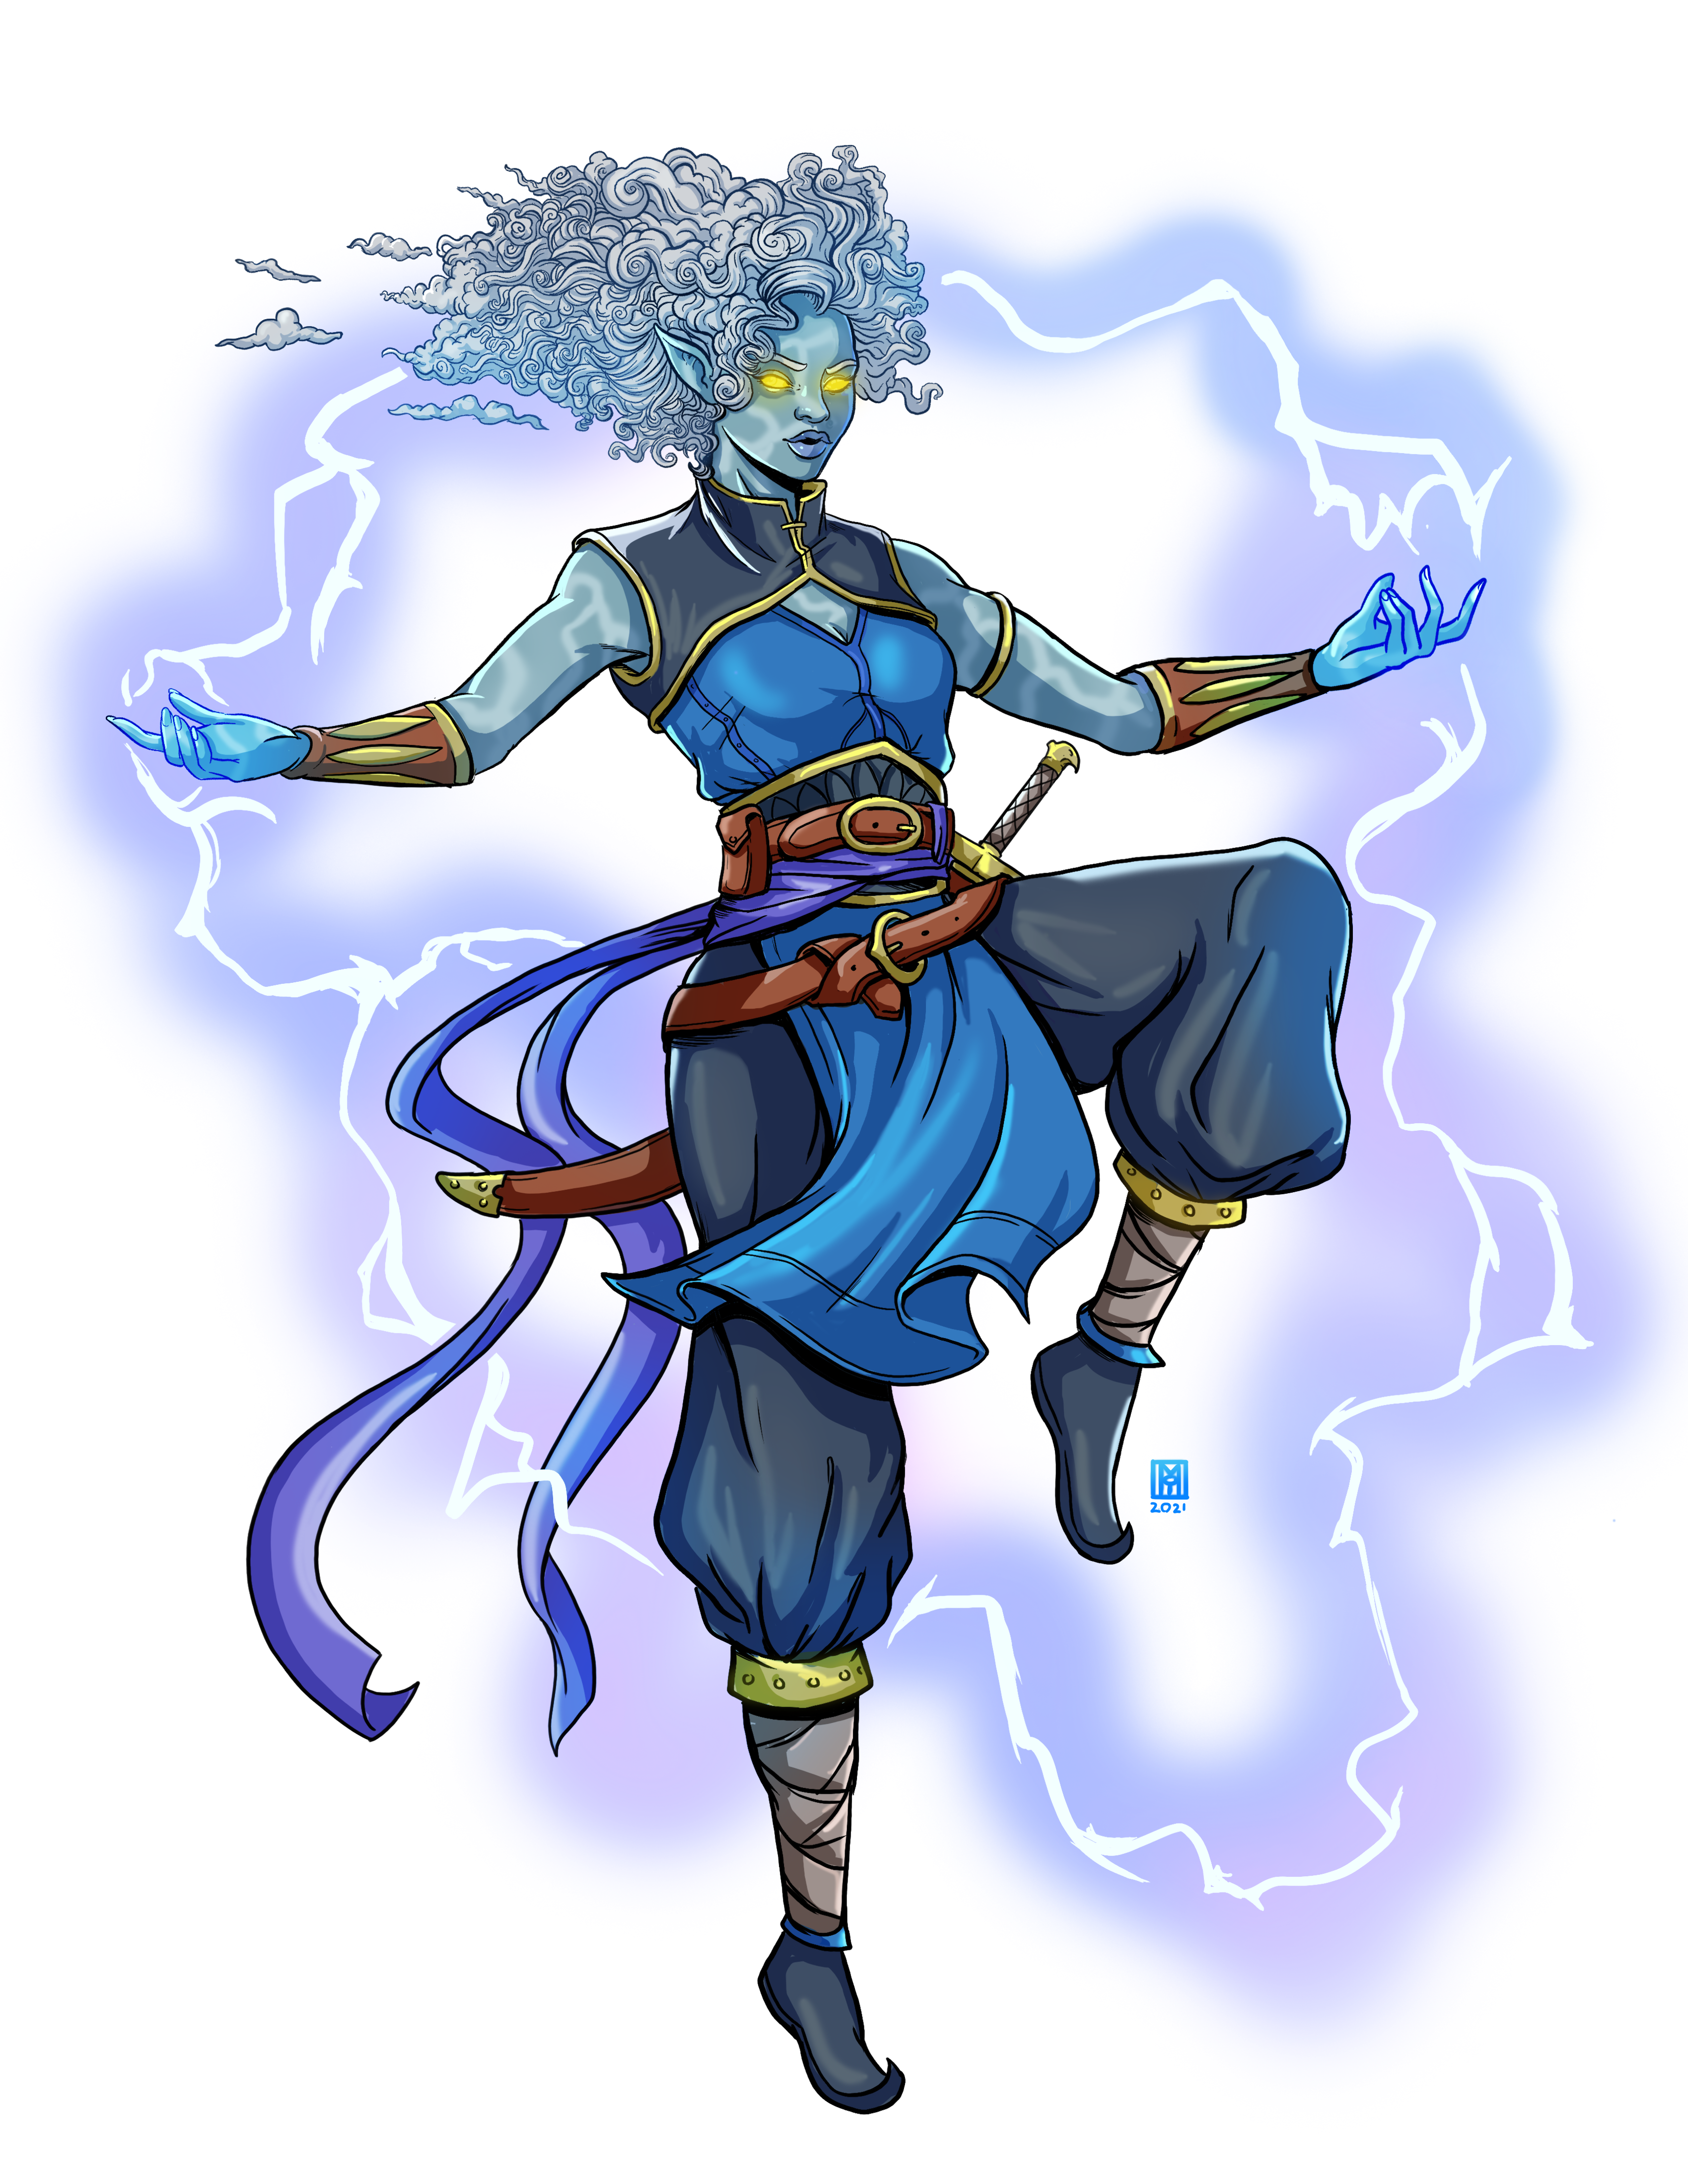 Tempestra, Born of Storms and the Wind